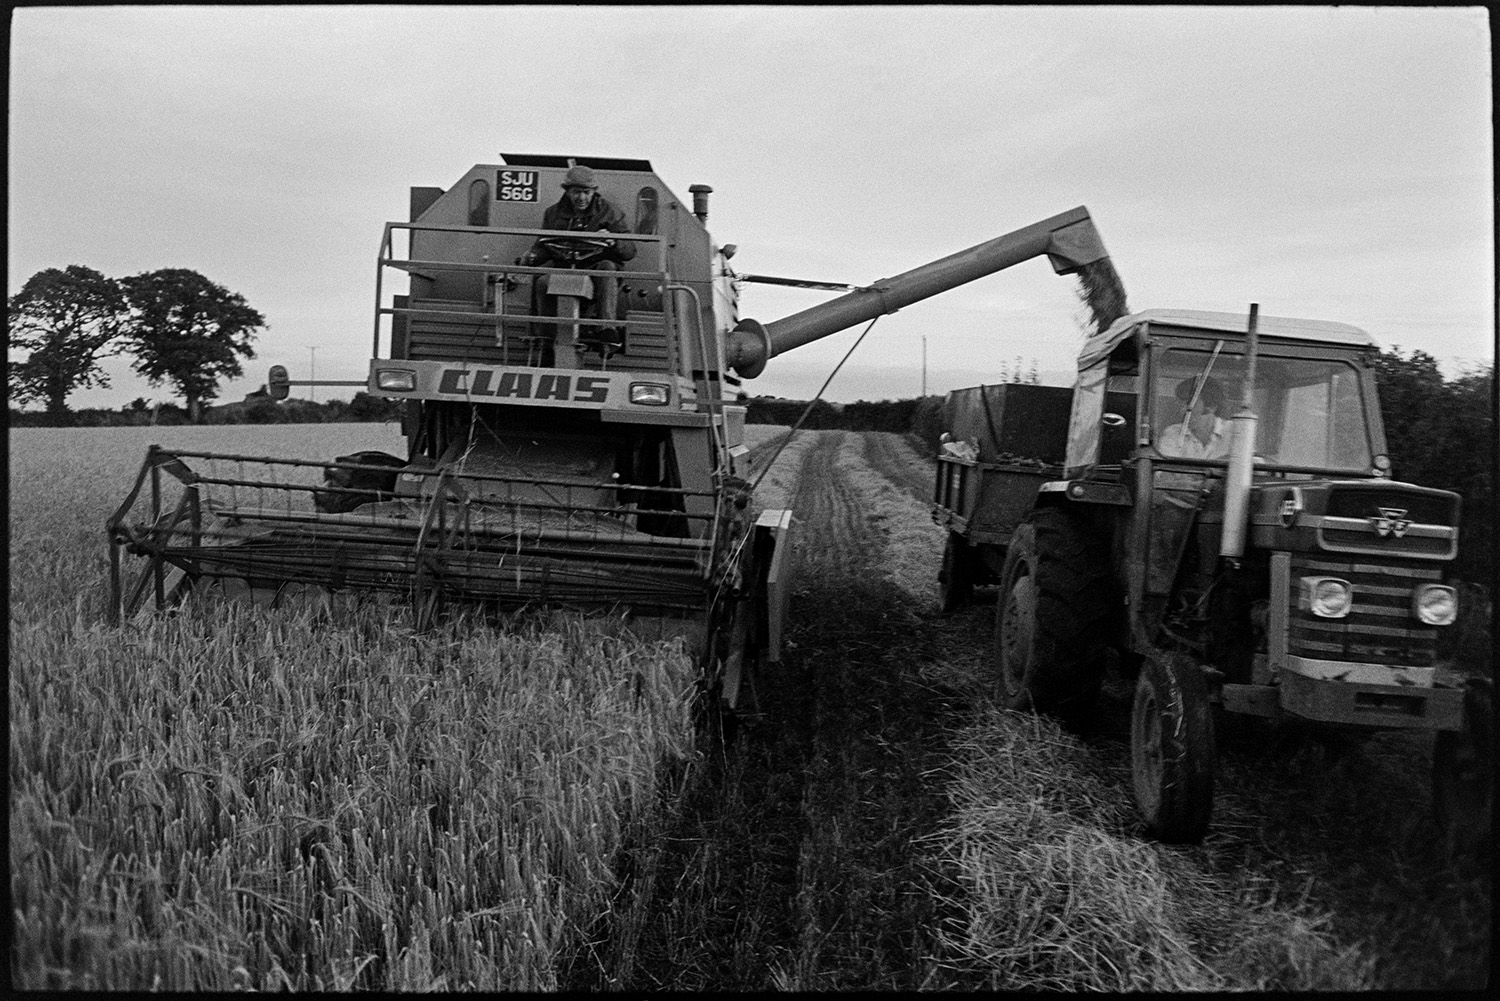 Combine harvester working in field. 
[A combine harvester filling a tractor and trailer with grain in a field at Parsonage, Iddesleigh.]